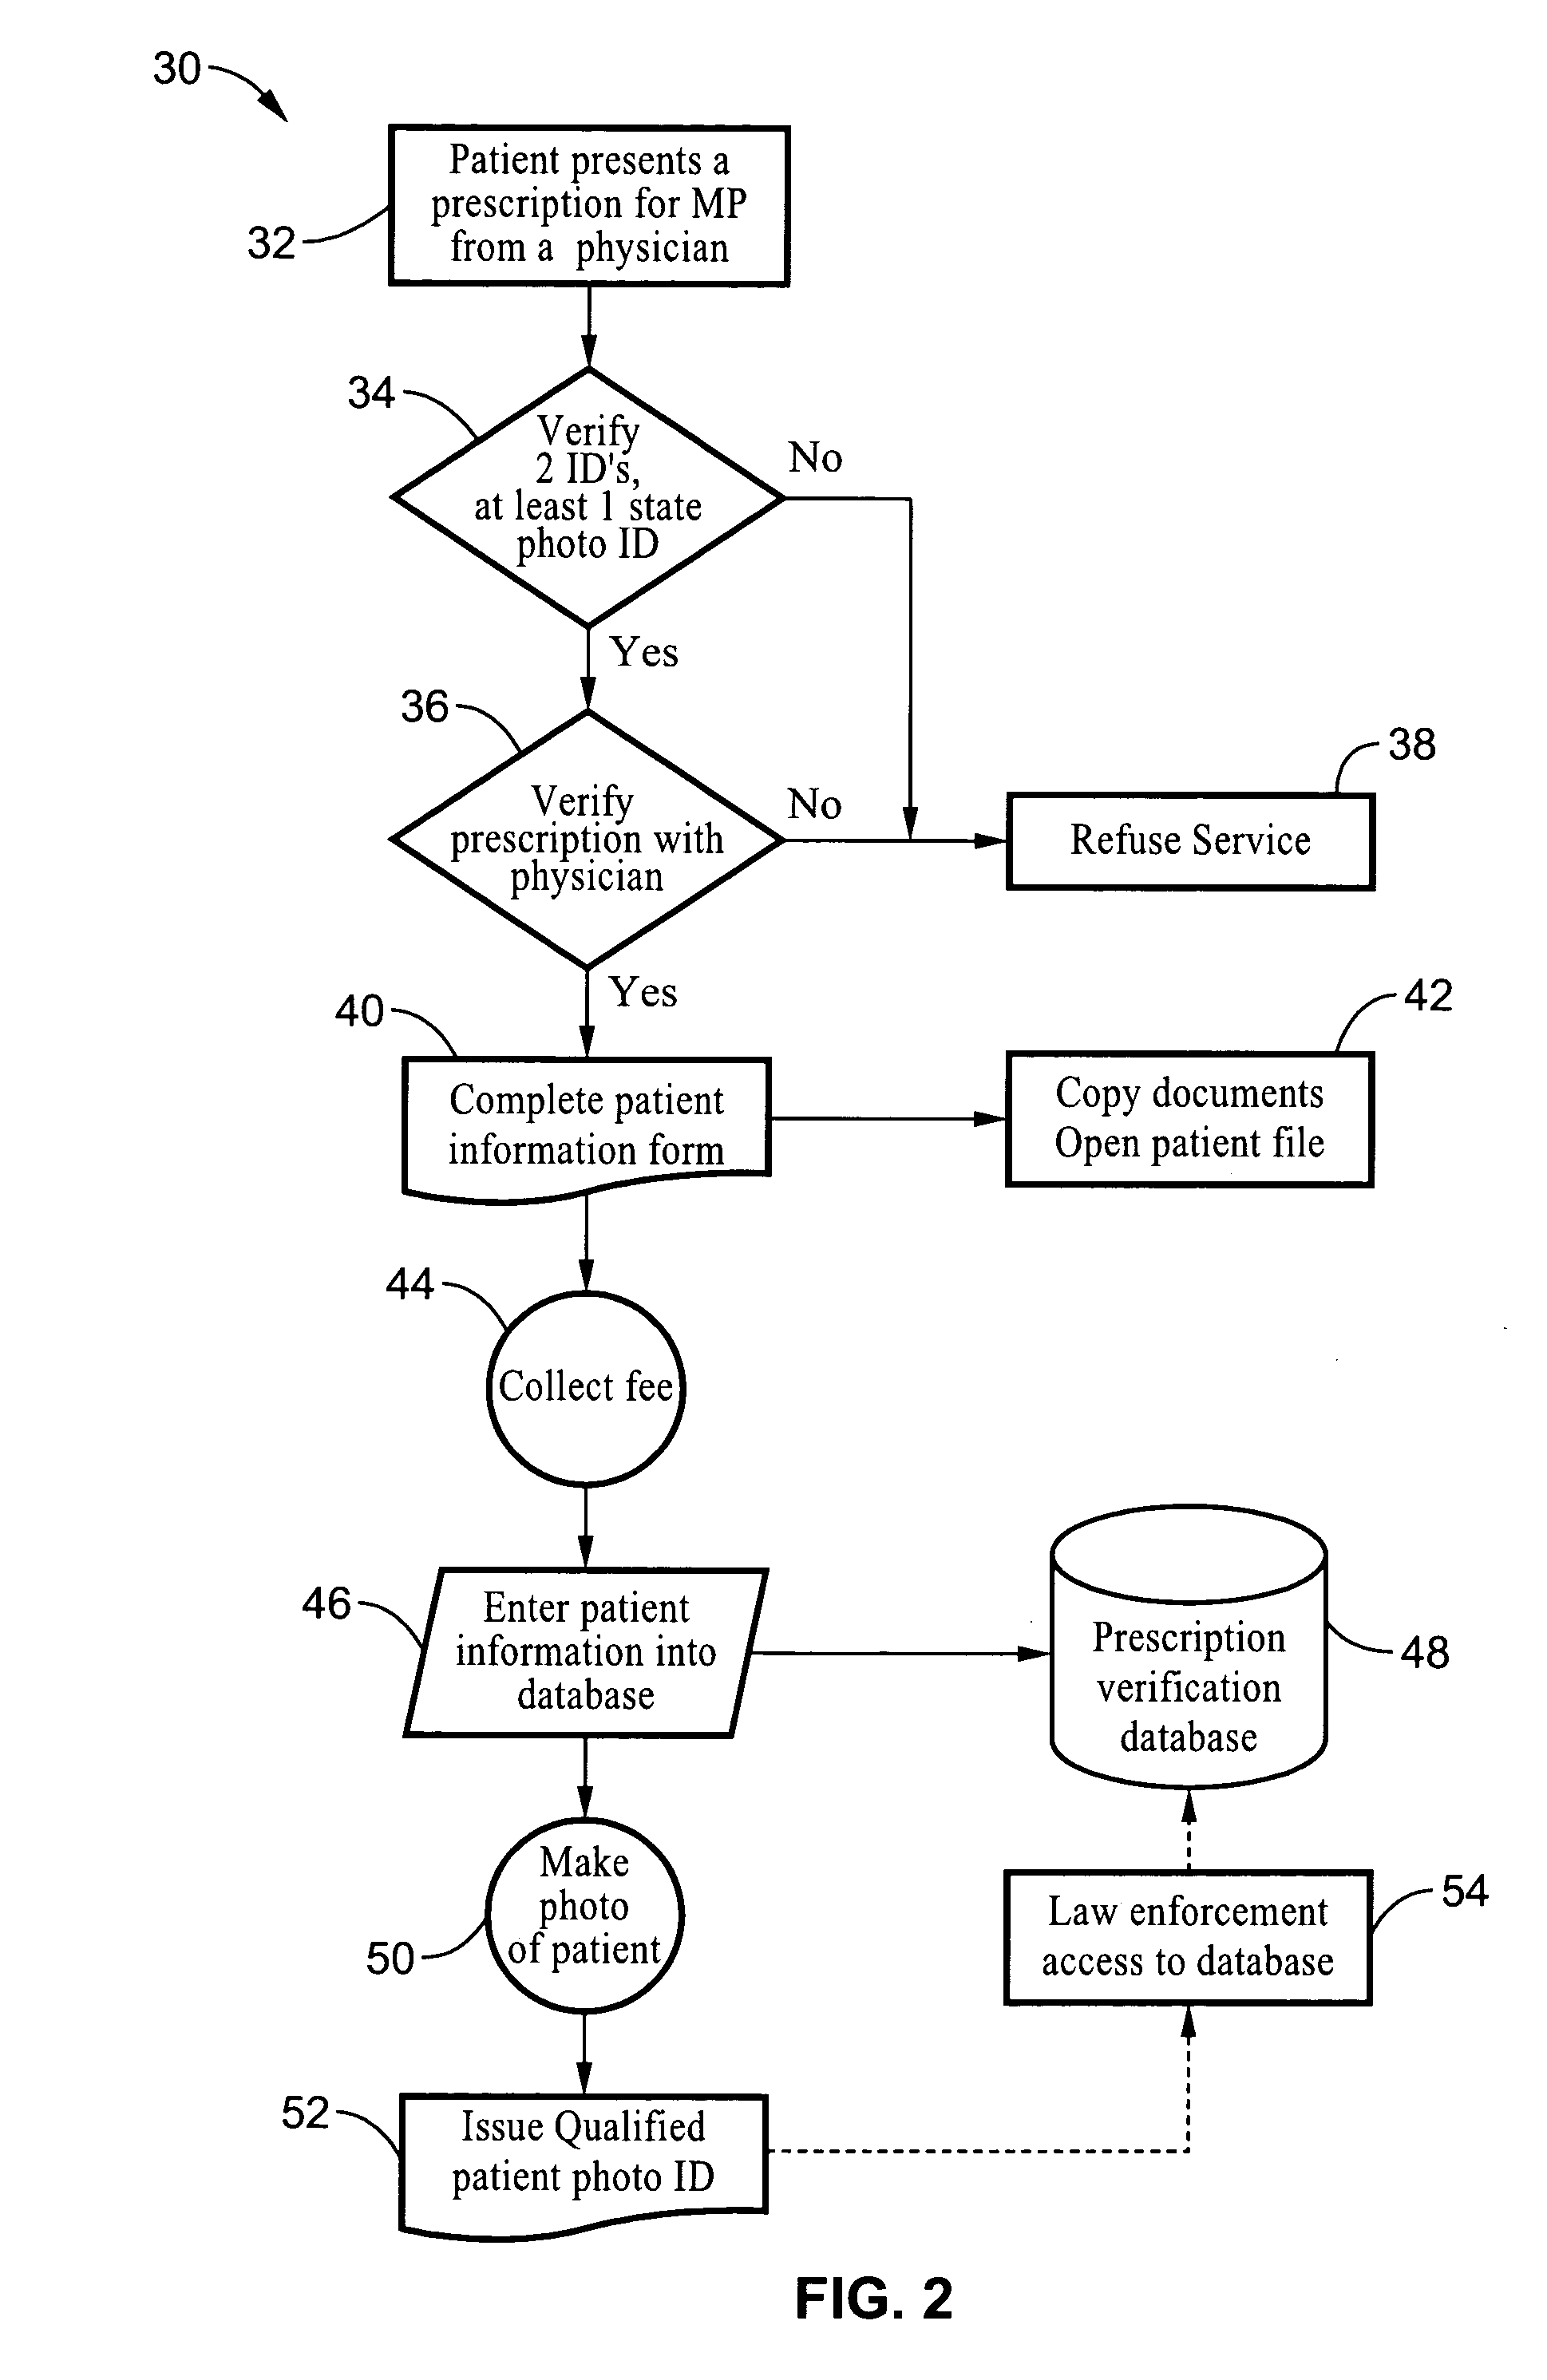 Method and apparatus to procure and grow medicinal plants